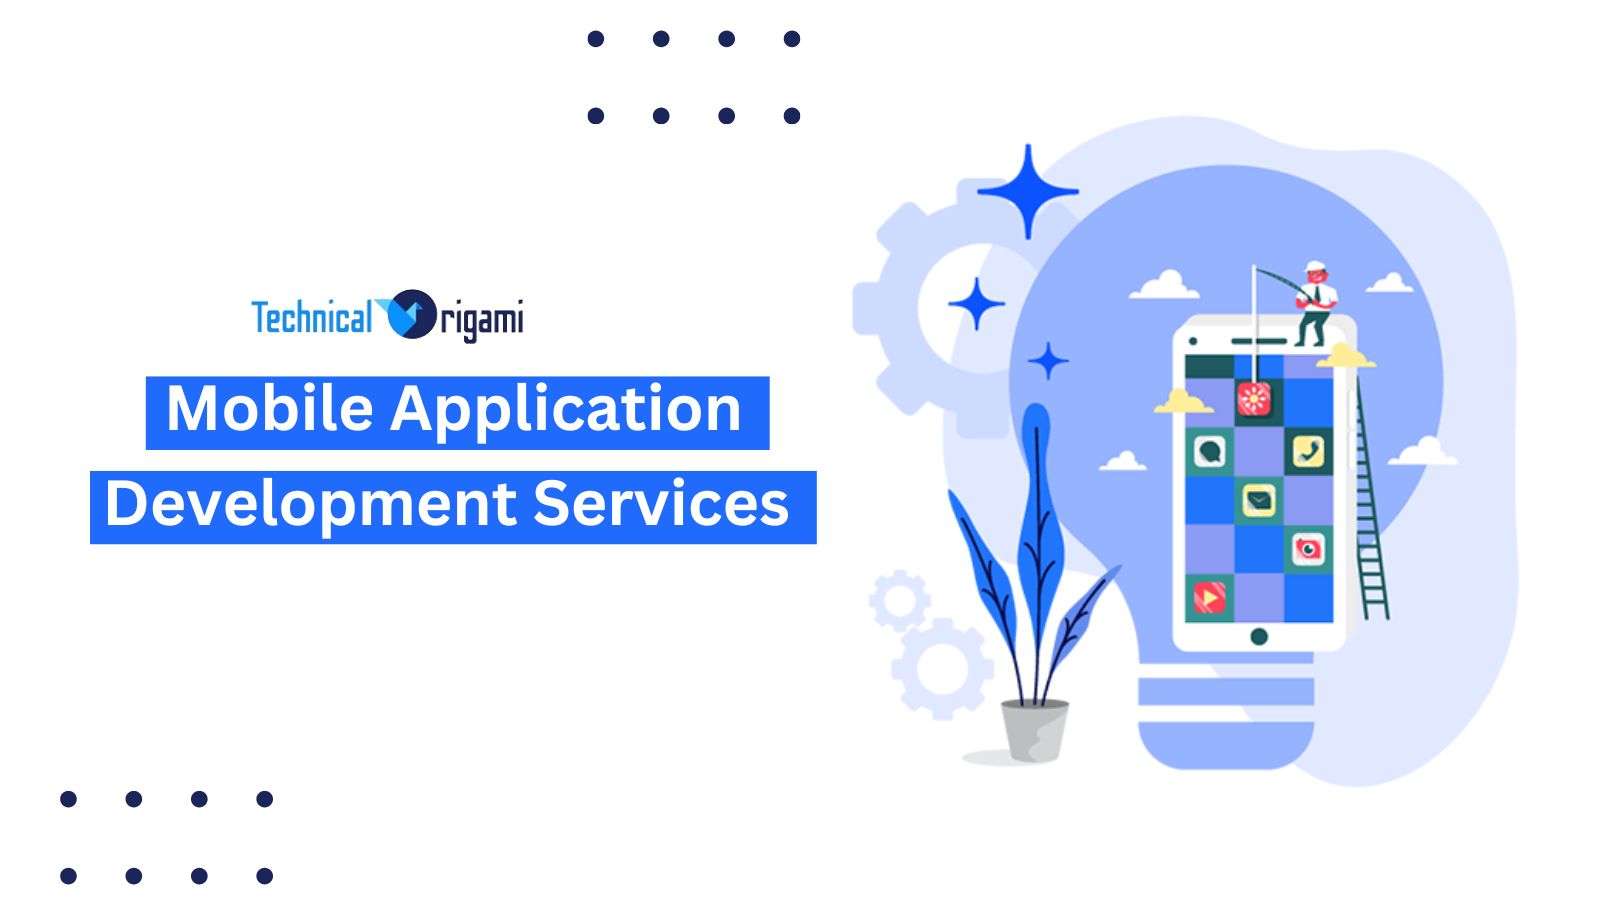 Mobile Application Development Services | Technical Origami